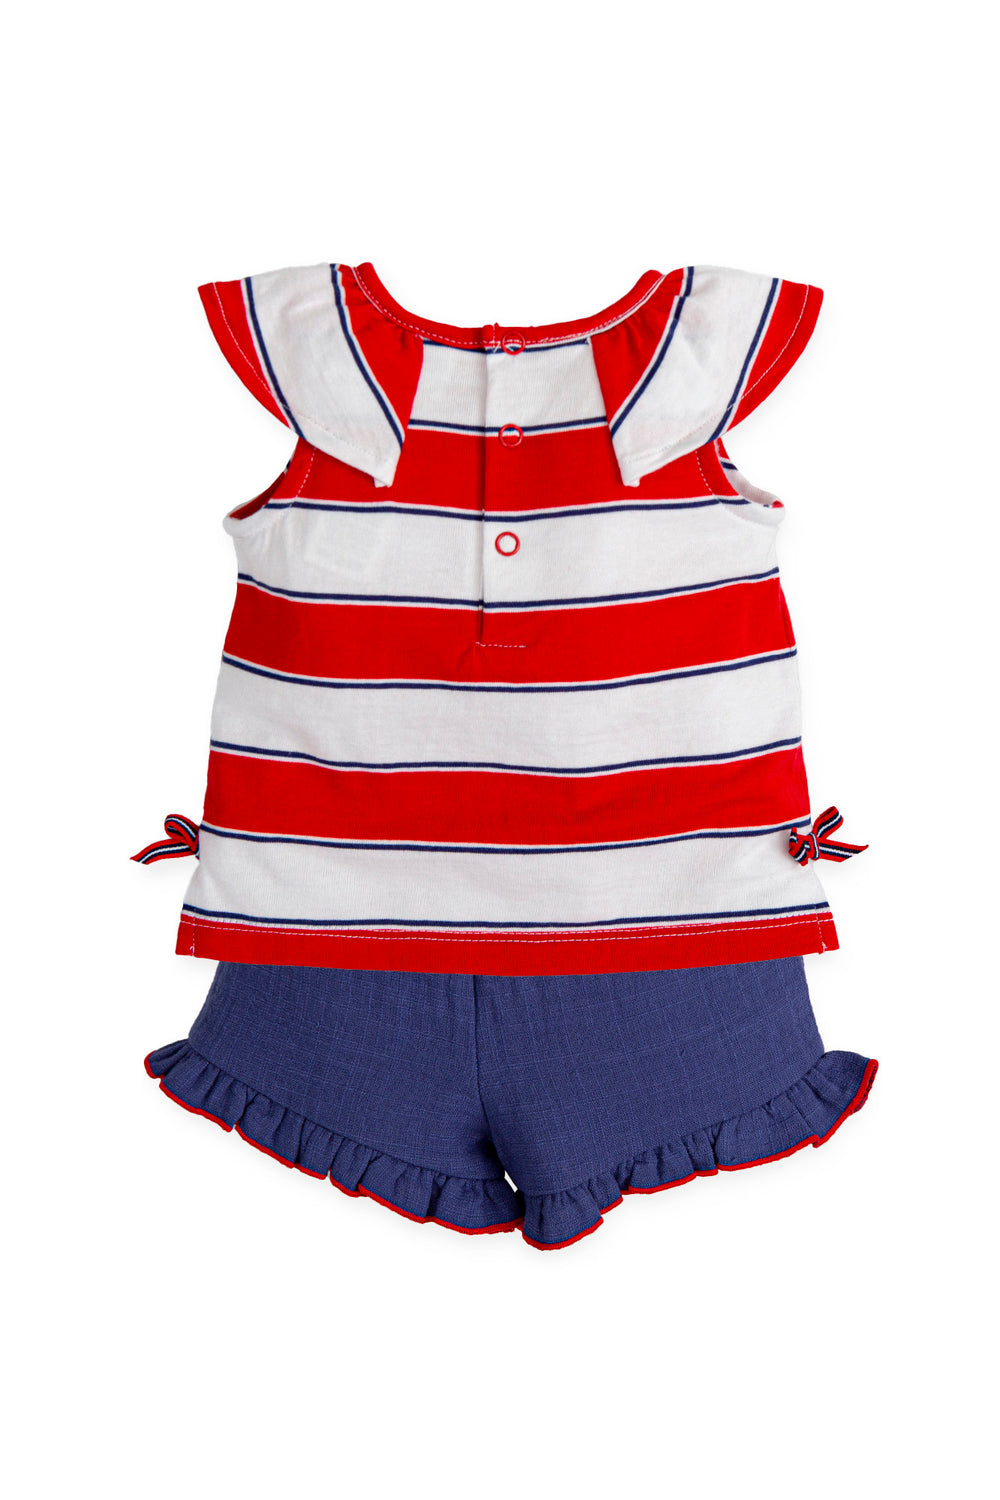 Tutto Piccolo "Nessa" Red & Navy Striped Blouse & Shorts | Millie and John